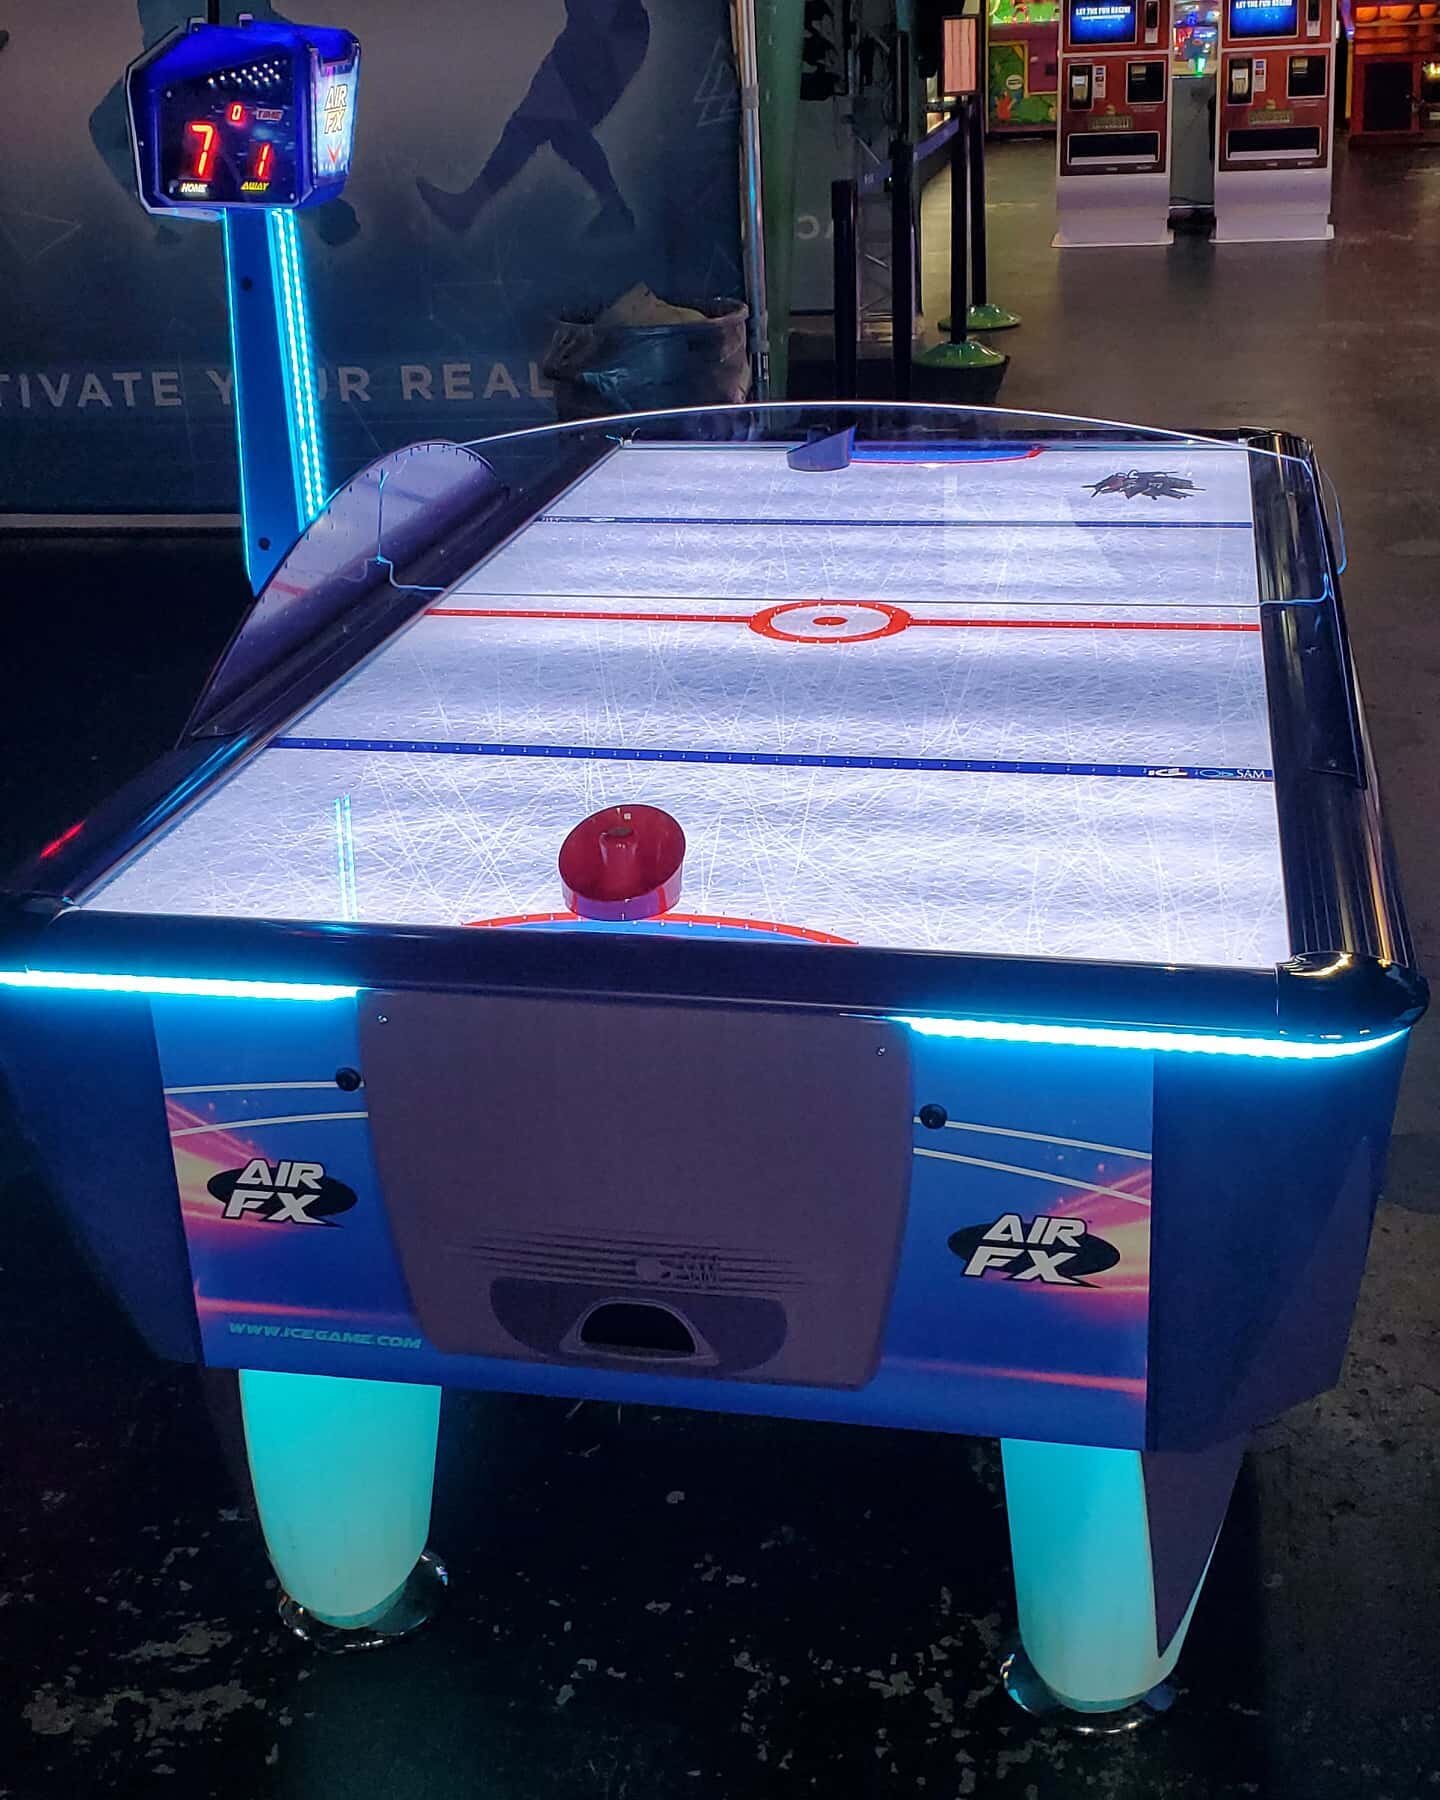 Come try out the new Air Hockey Table!